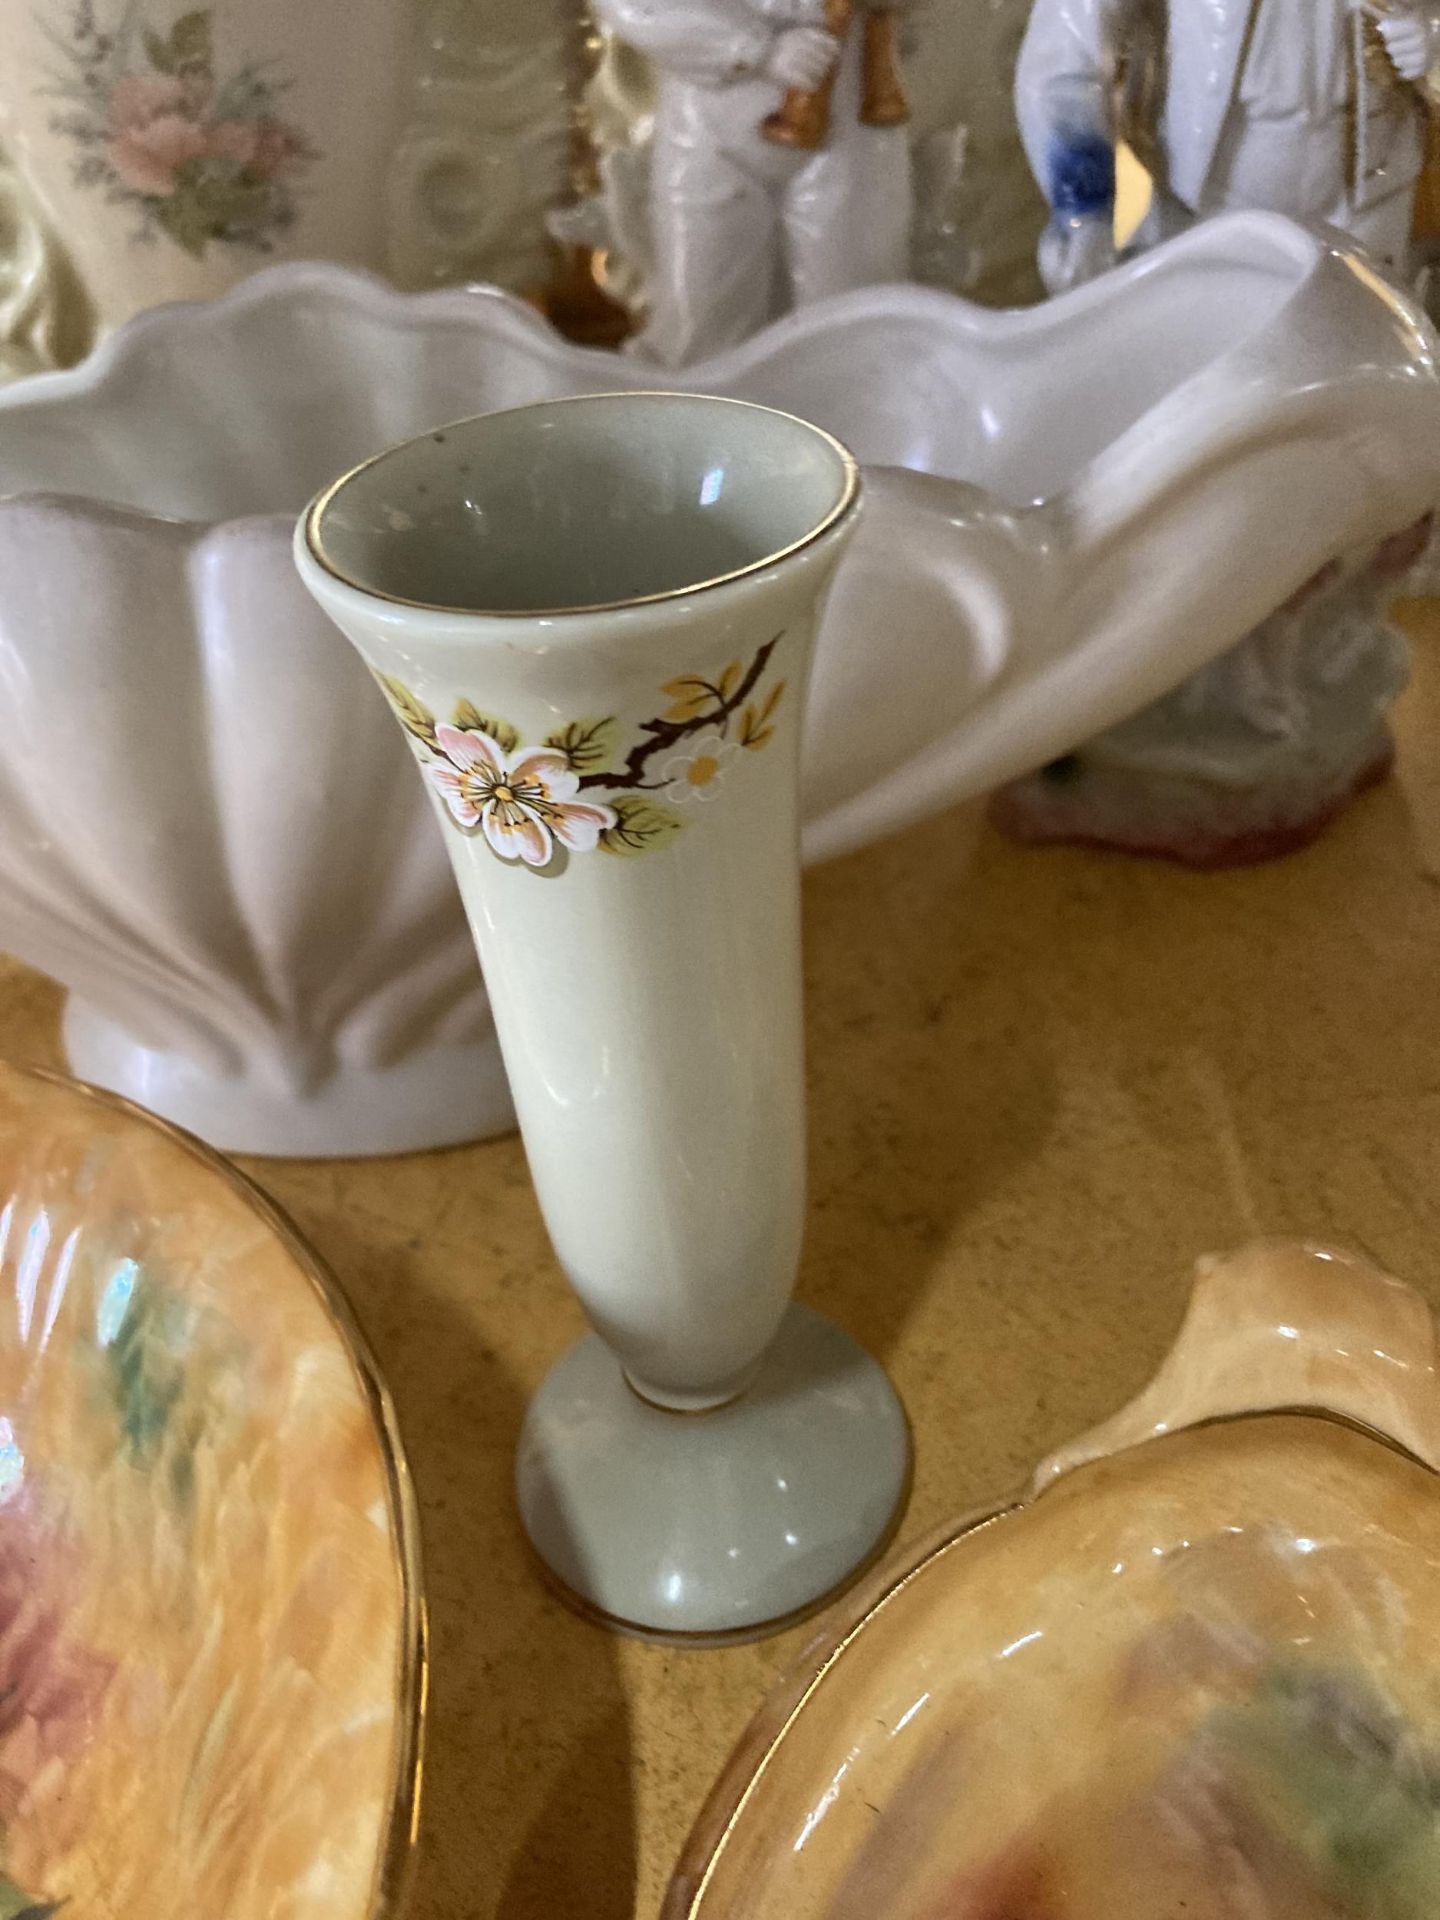 A LARGE QUANTITY OF VINTAGE CERAMIC ITEMS TO INCLUDE VASES, A PLANTER BOWLS, FIGURES, ETC - Image 3 of 5